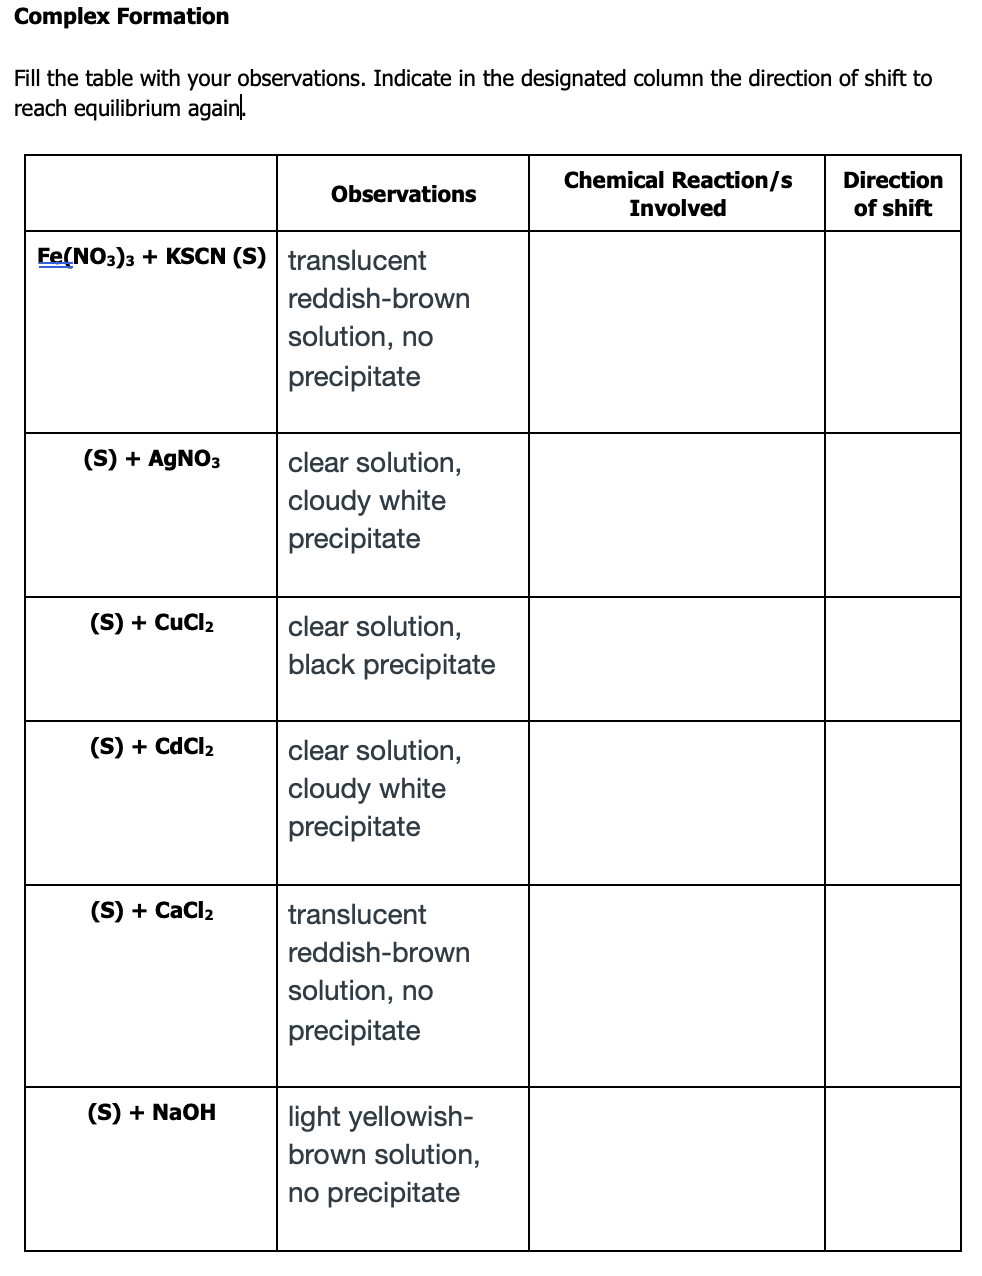 Complex Formation
Fill the table with your observations. Indicate in the designated column the direction of shift to
reach equilibrium again.
Chemical Reaction/s
Direction
Observations
Involved
of shift
Fe(NO3)3 + KSCN (S) translucent
reddish-brown
solution, no
precipitate
(S) + AGNO3
clear solution,
cloudy white
precipitate
(S) + CuCl2
clear solution,
black precipitate
(S) + CdCl2
clear solution,
cloudy white
precipitate
(S) + CaCl2
translucent
reddish-brown
solution, no
precipitate
(S) + NaOH
light yellowish-
brown solution,
no precipitate
